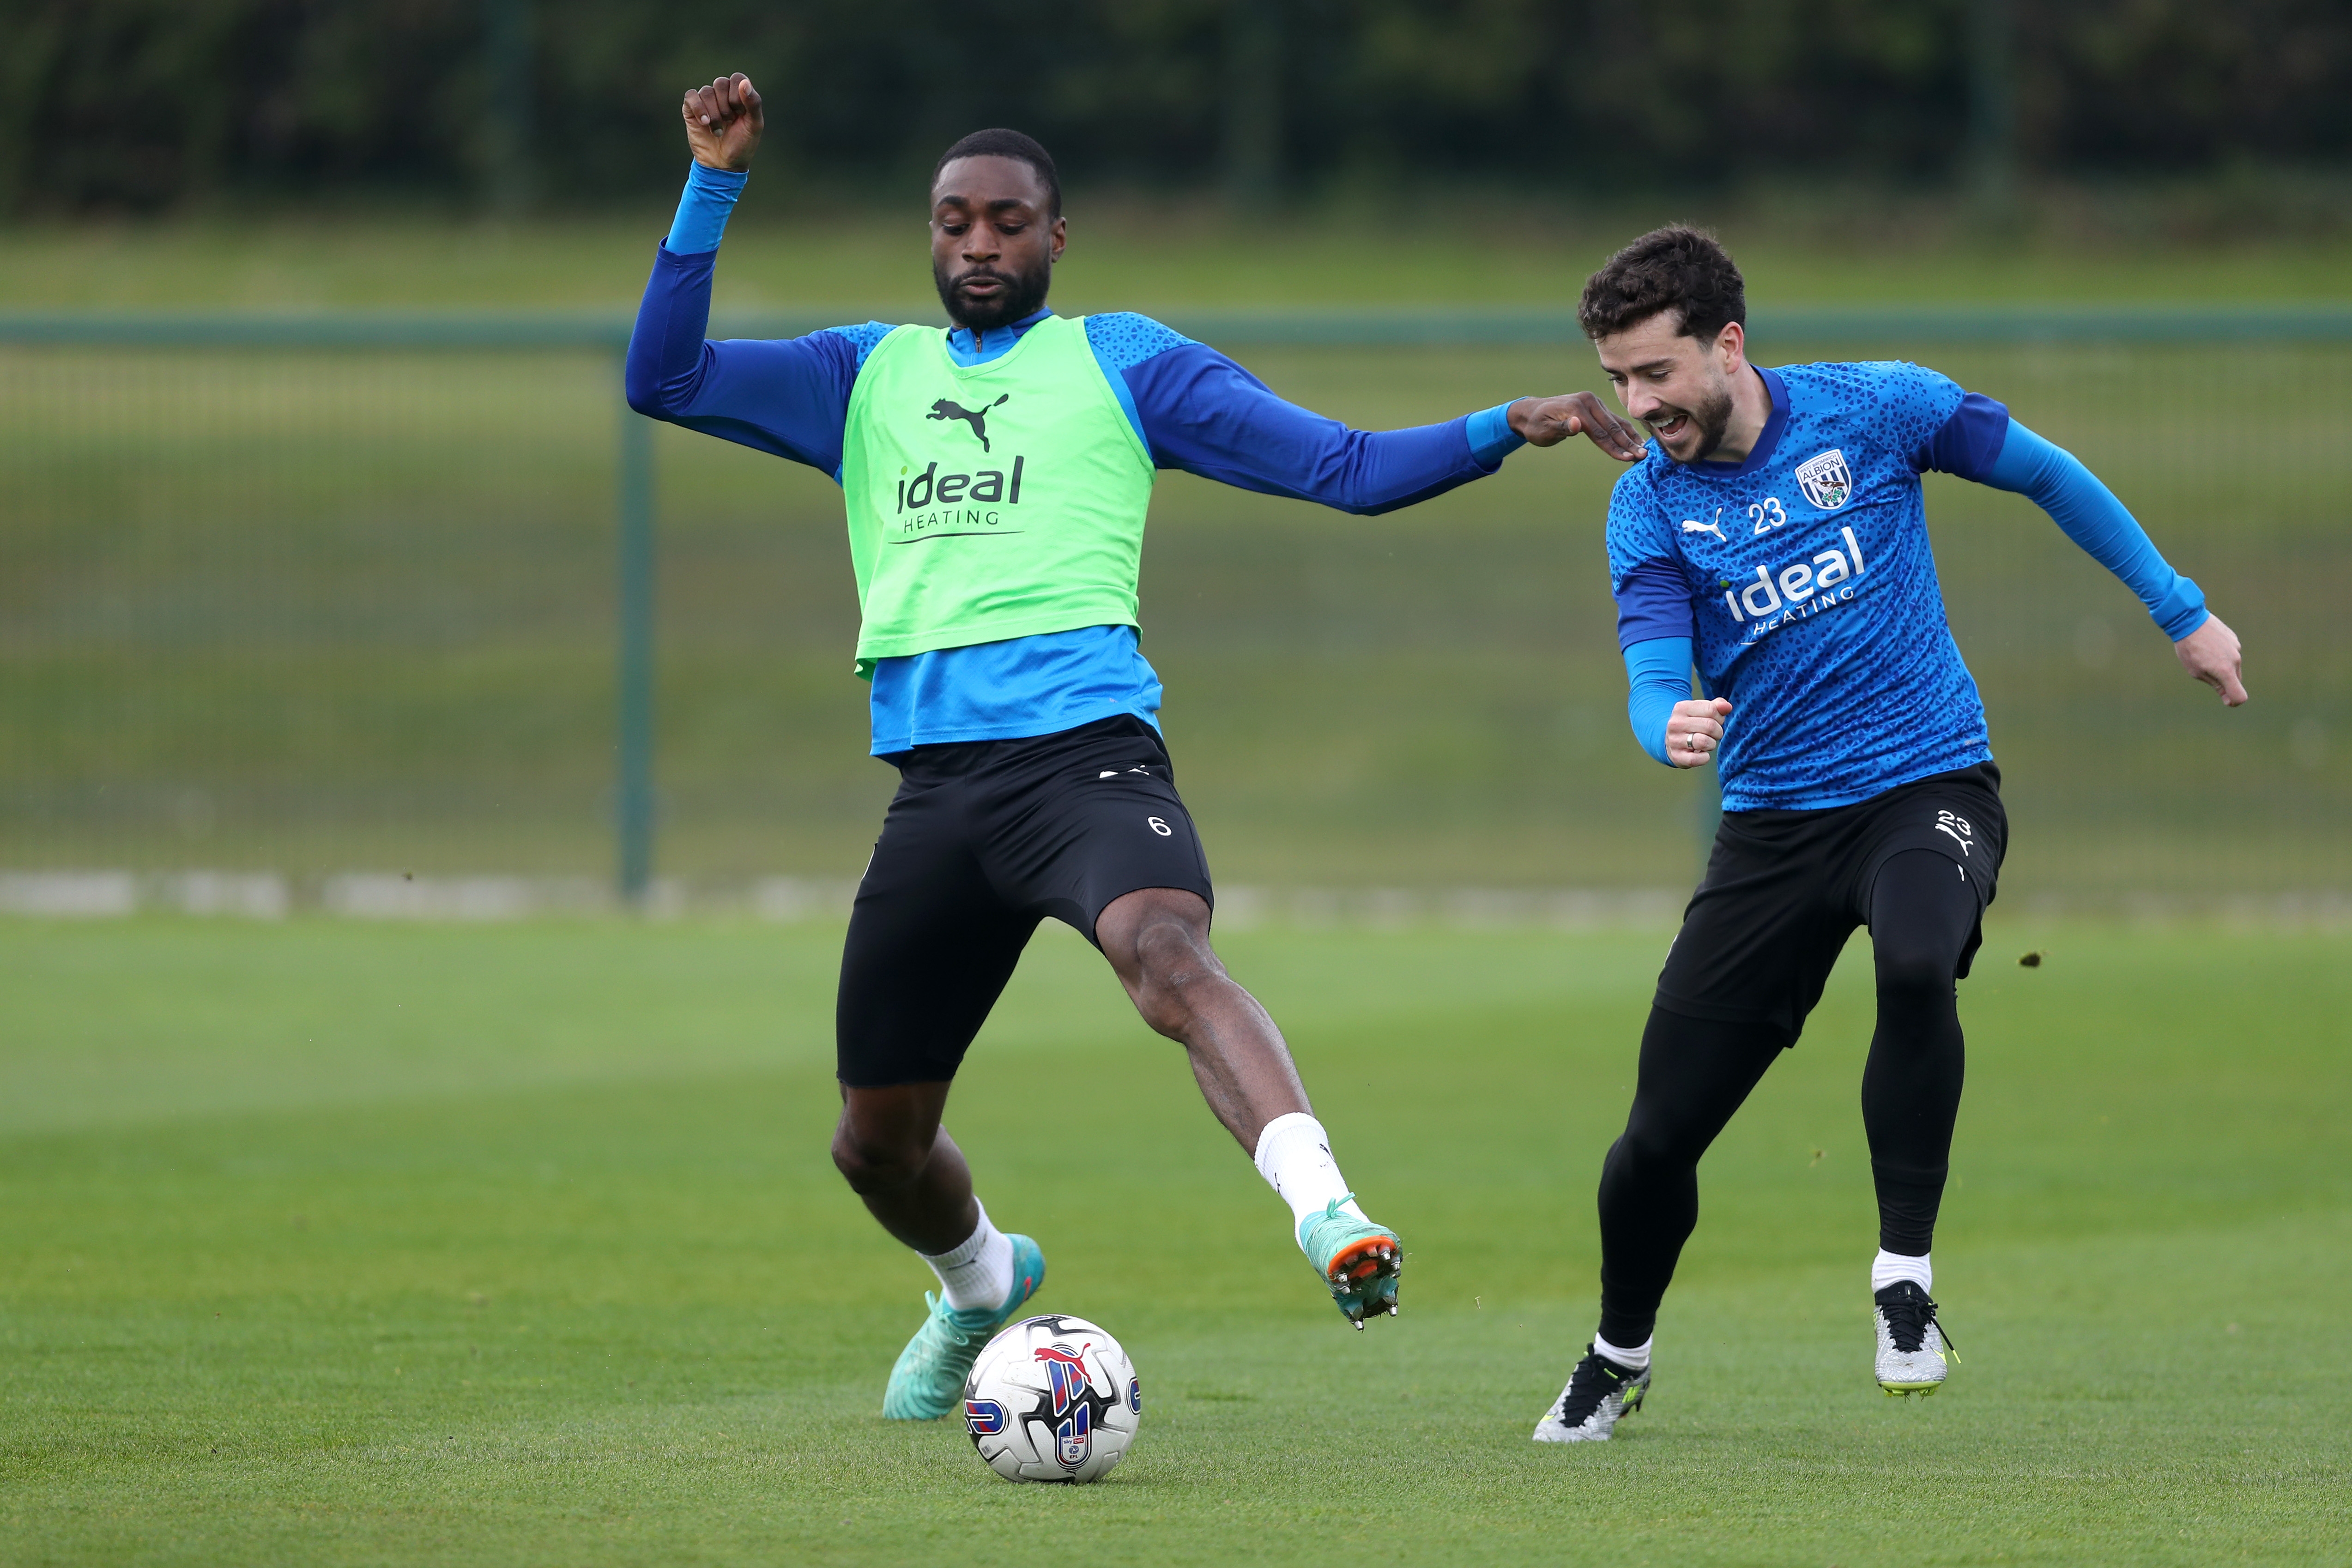 Semi Ajayi and Mikey Johnston fighting for the ball during a training session